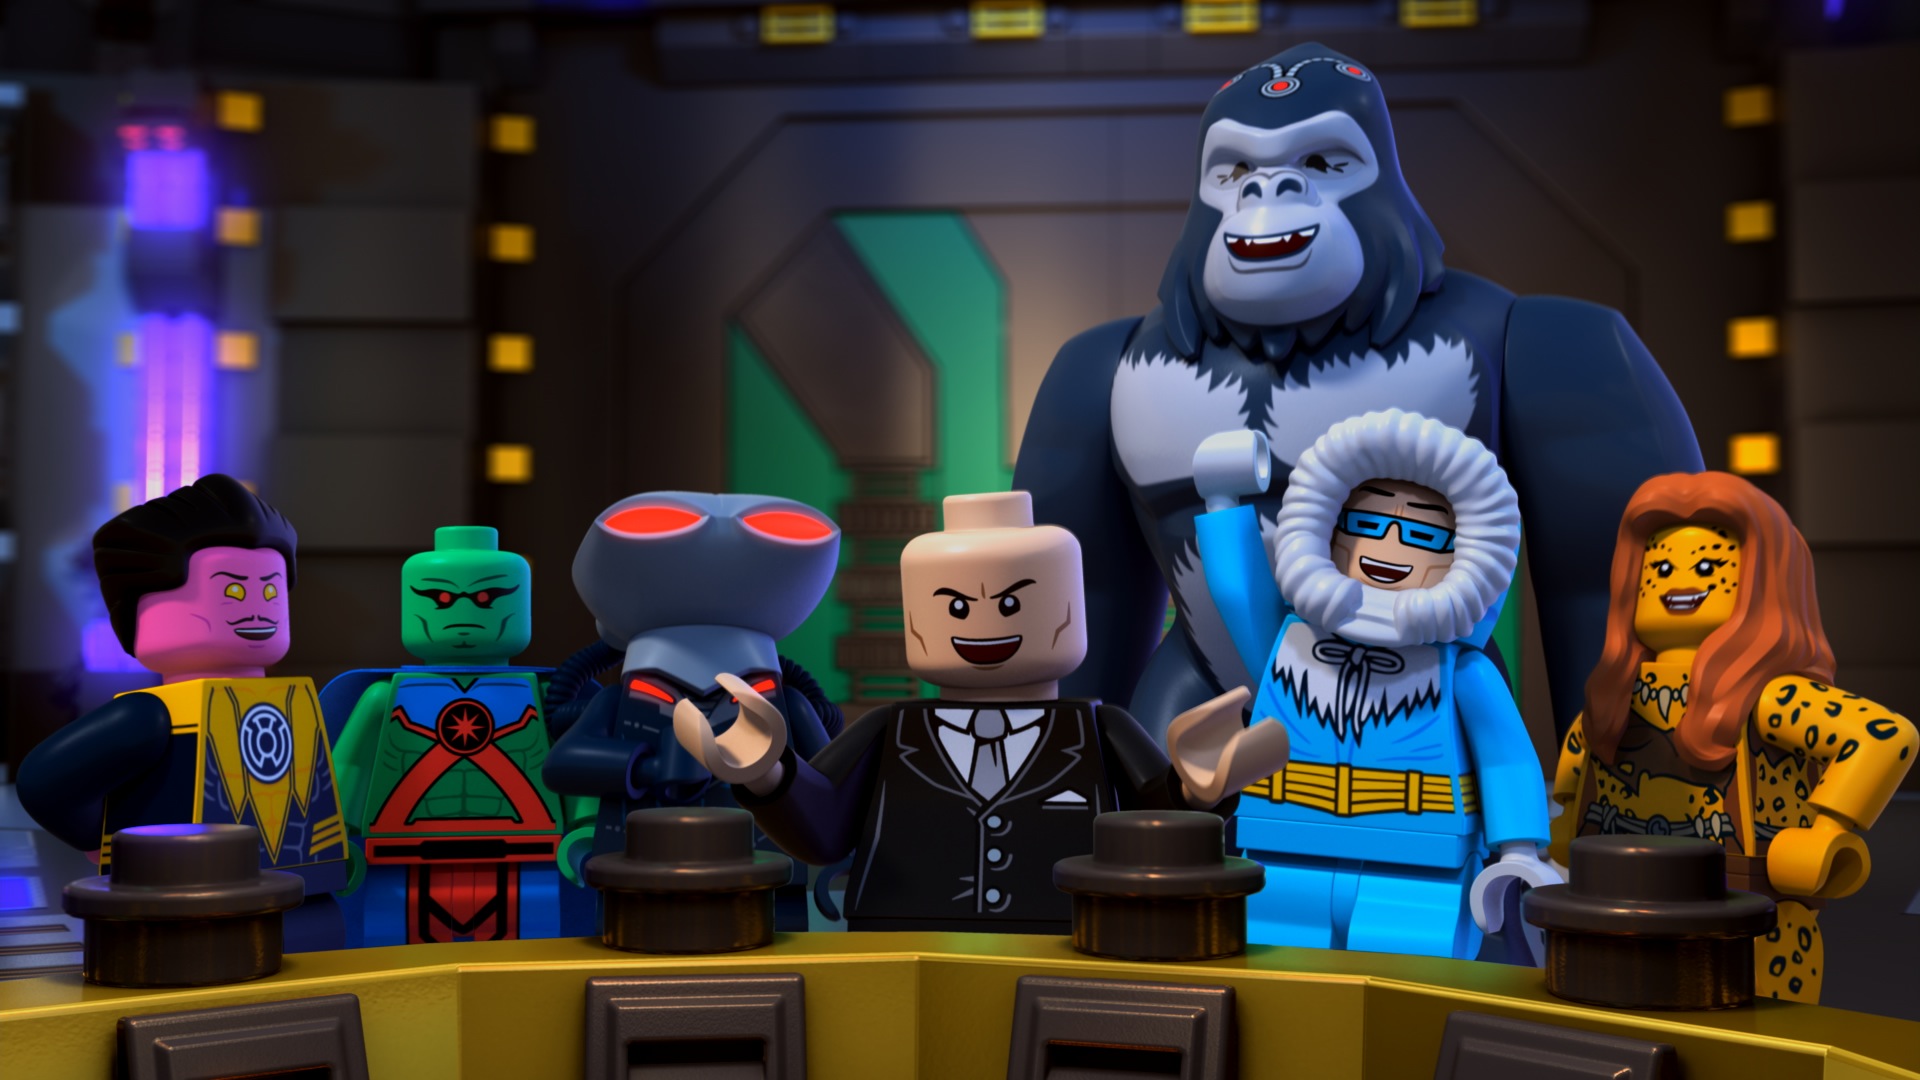 HD Quality Wallpaper | Collection: Movie, 1920x1080 LEGO DC Super Heroes: Justice League - Attack Of The Legion Of Doom!